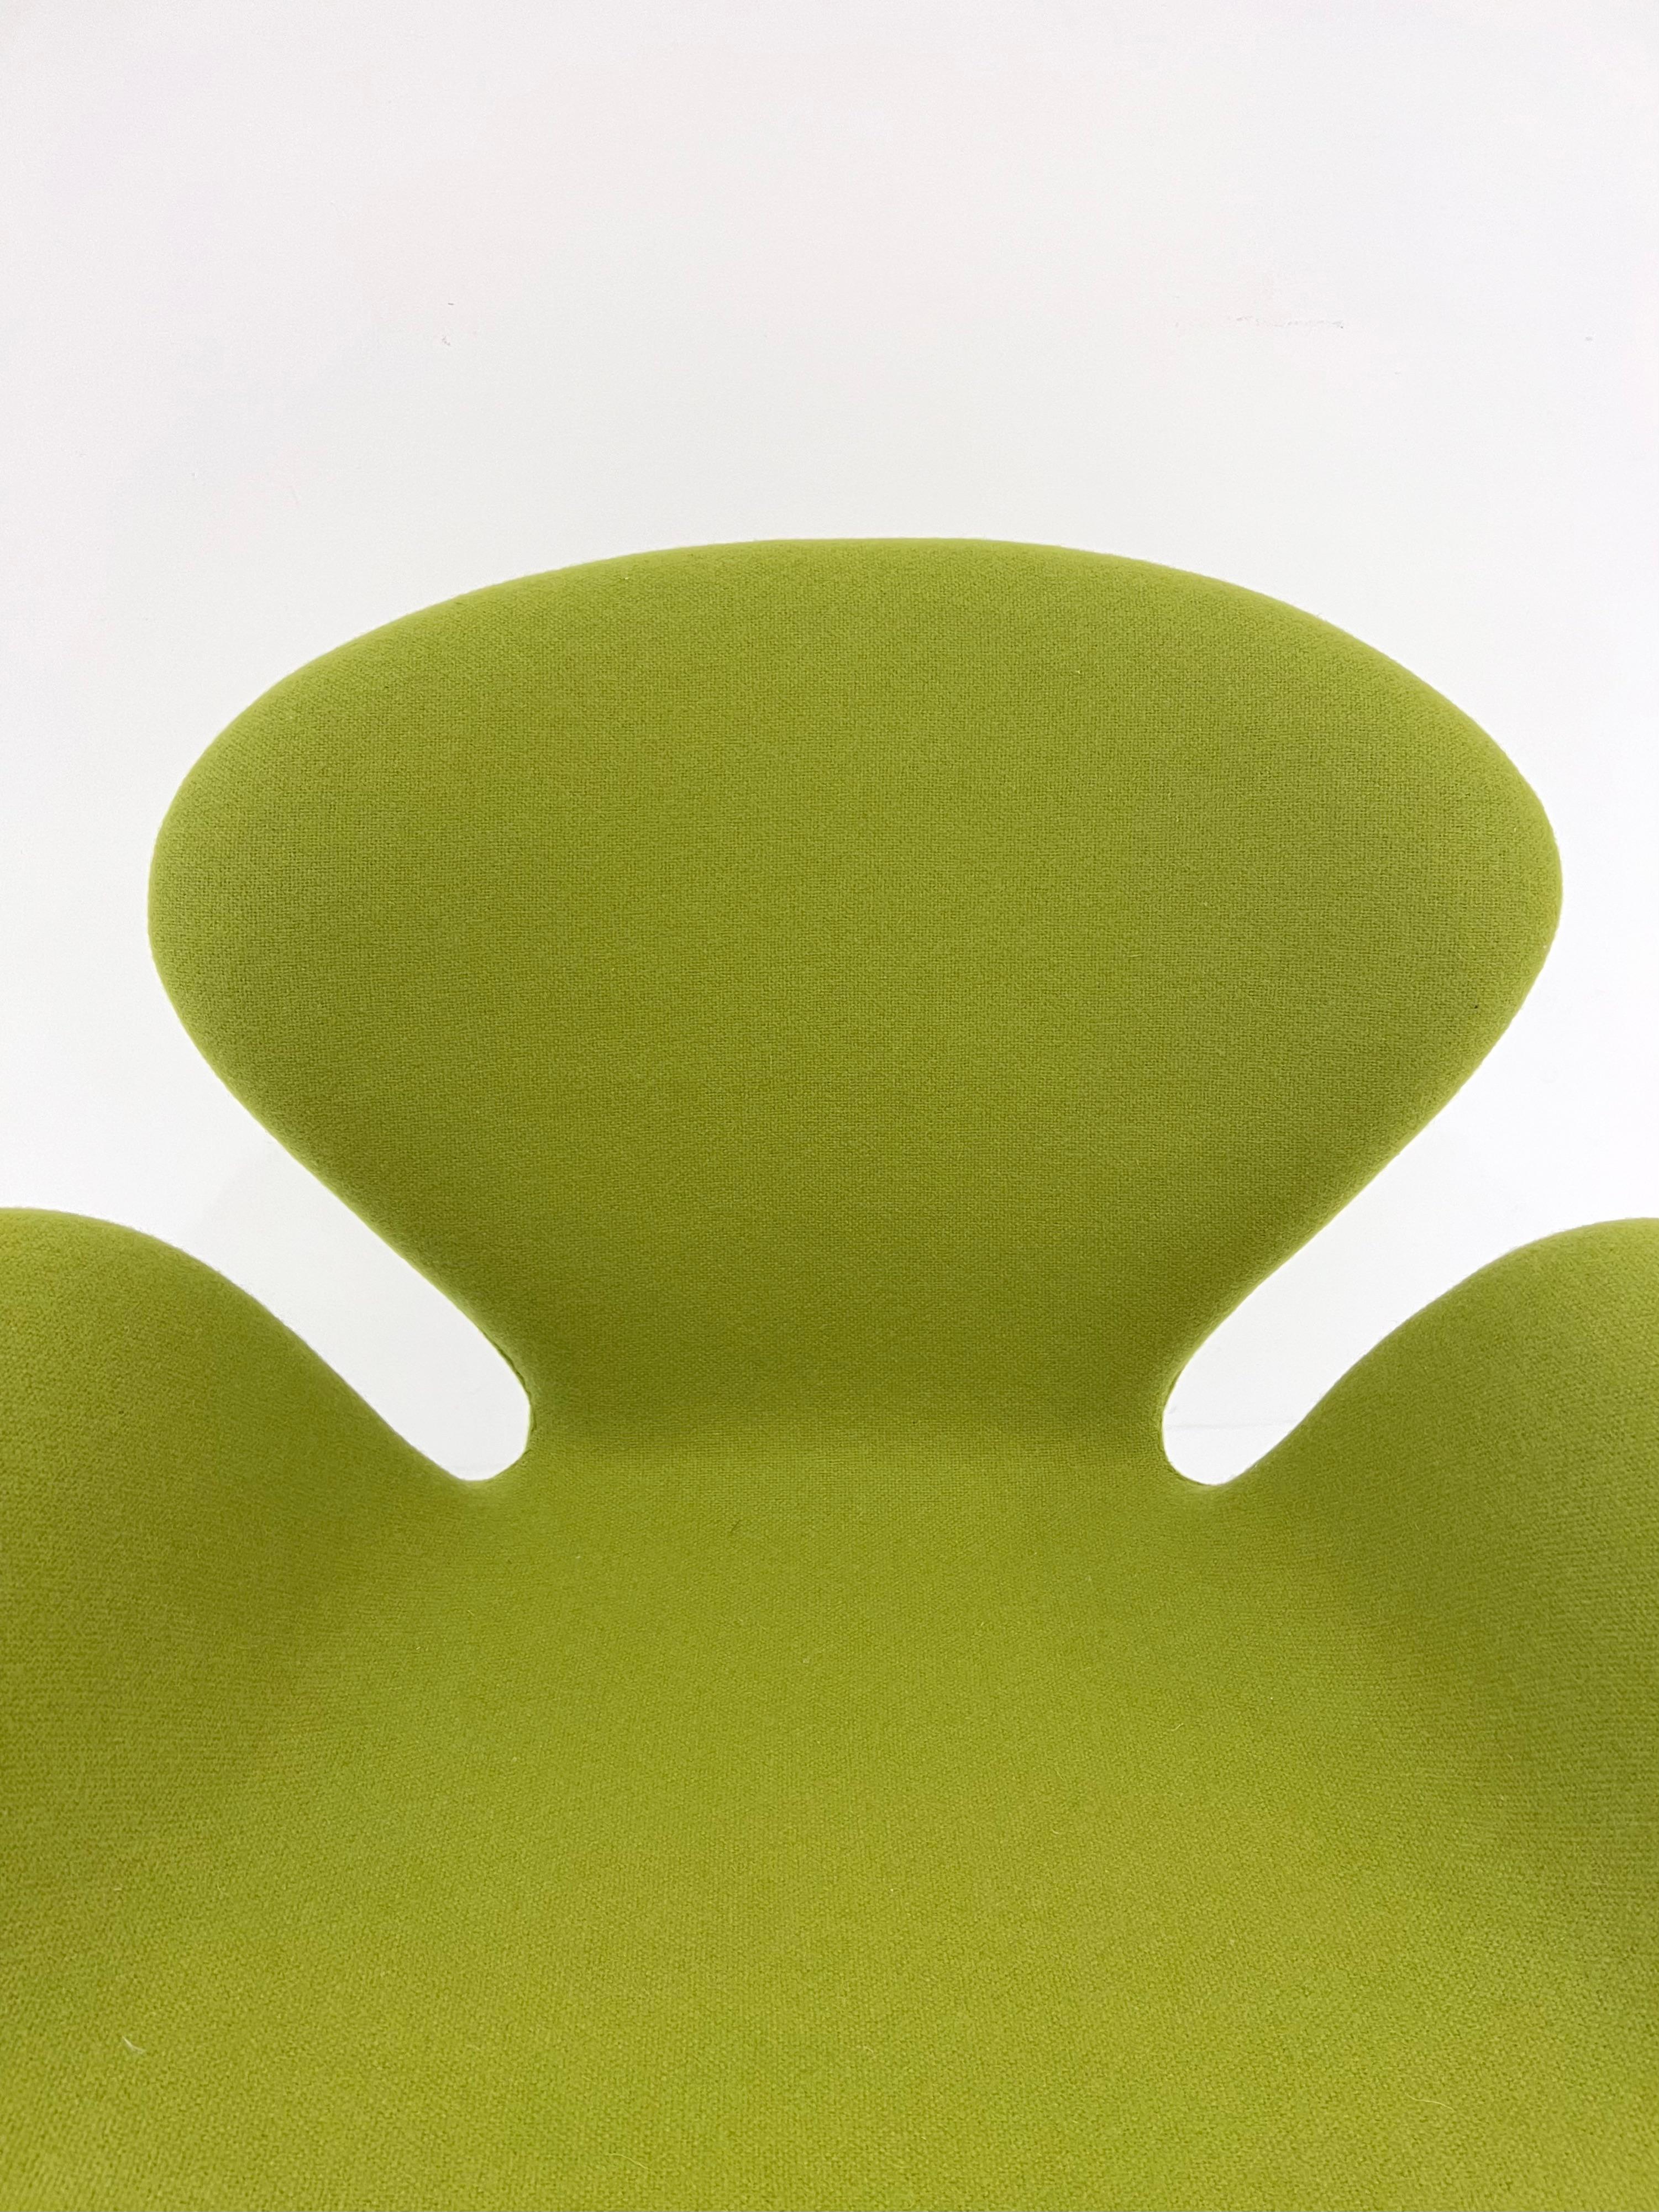 Swan Chair by Arne Jacobsen for Fritz Hansen In Good Condition For Sale In New York, NY